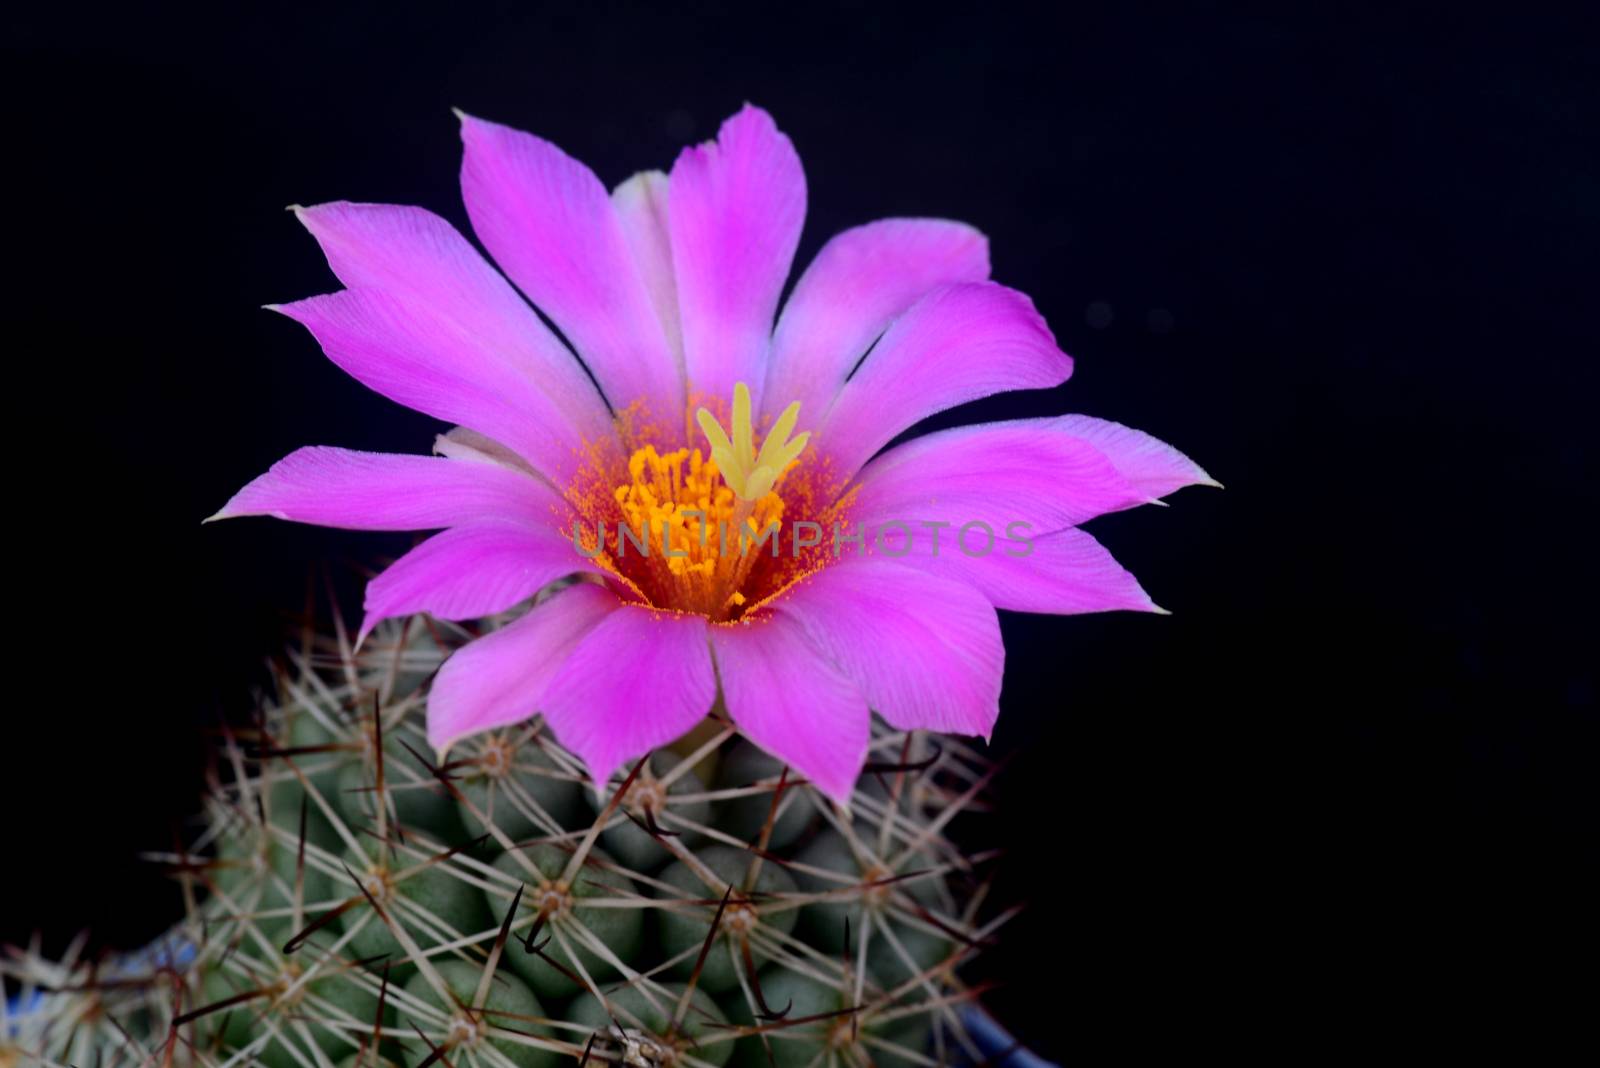 Blooming pink  flower of Mammillaria schumannii  cactus on  black  background by ideation90